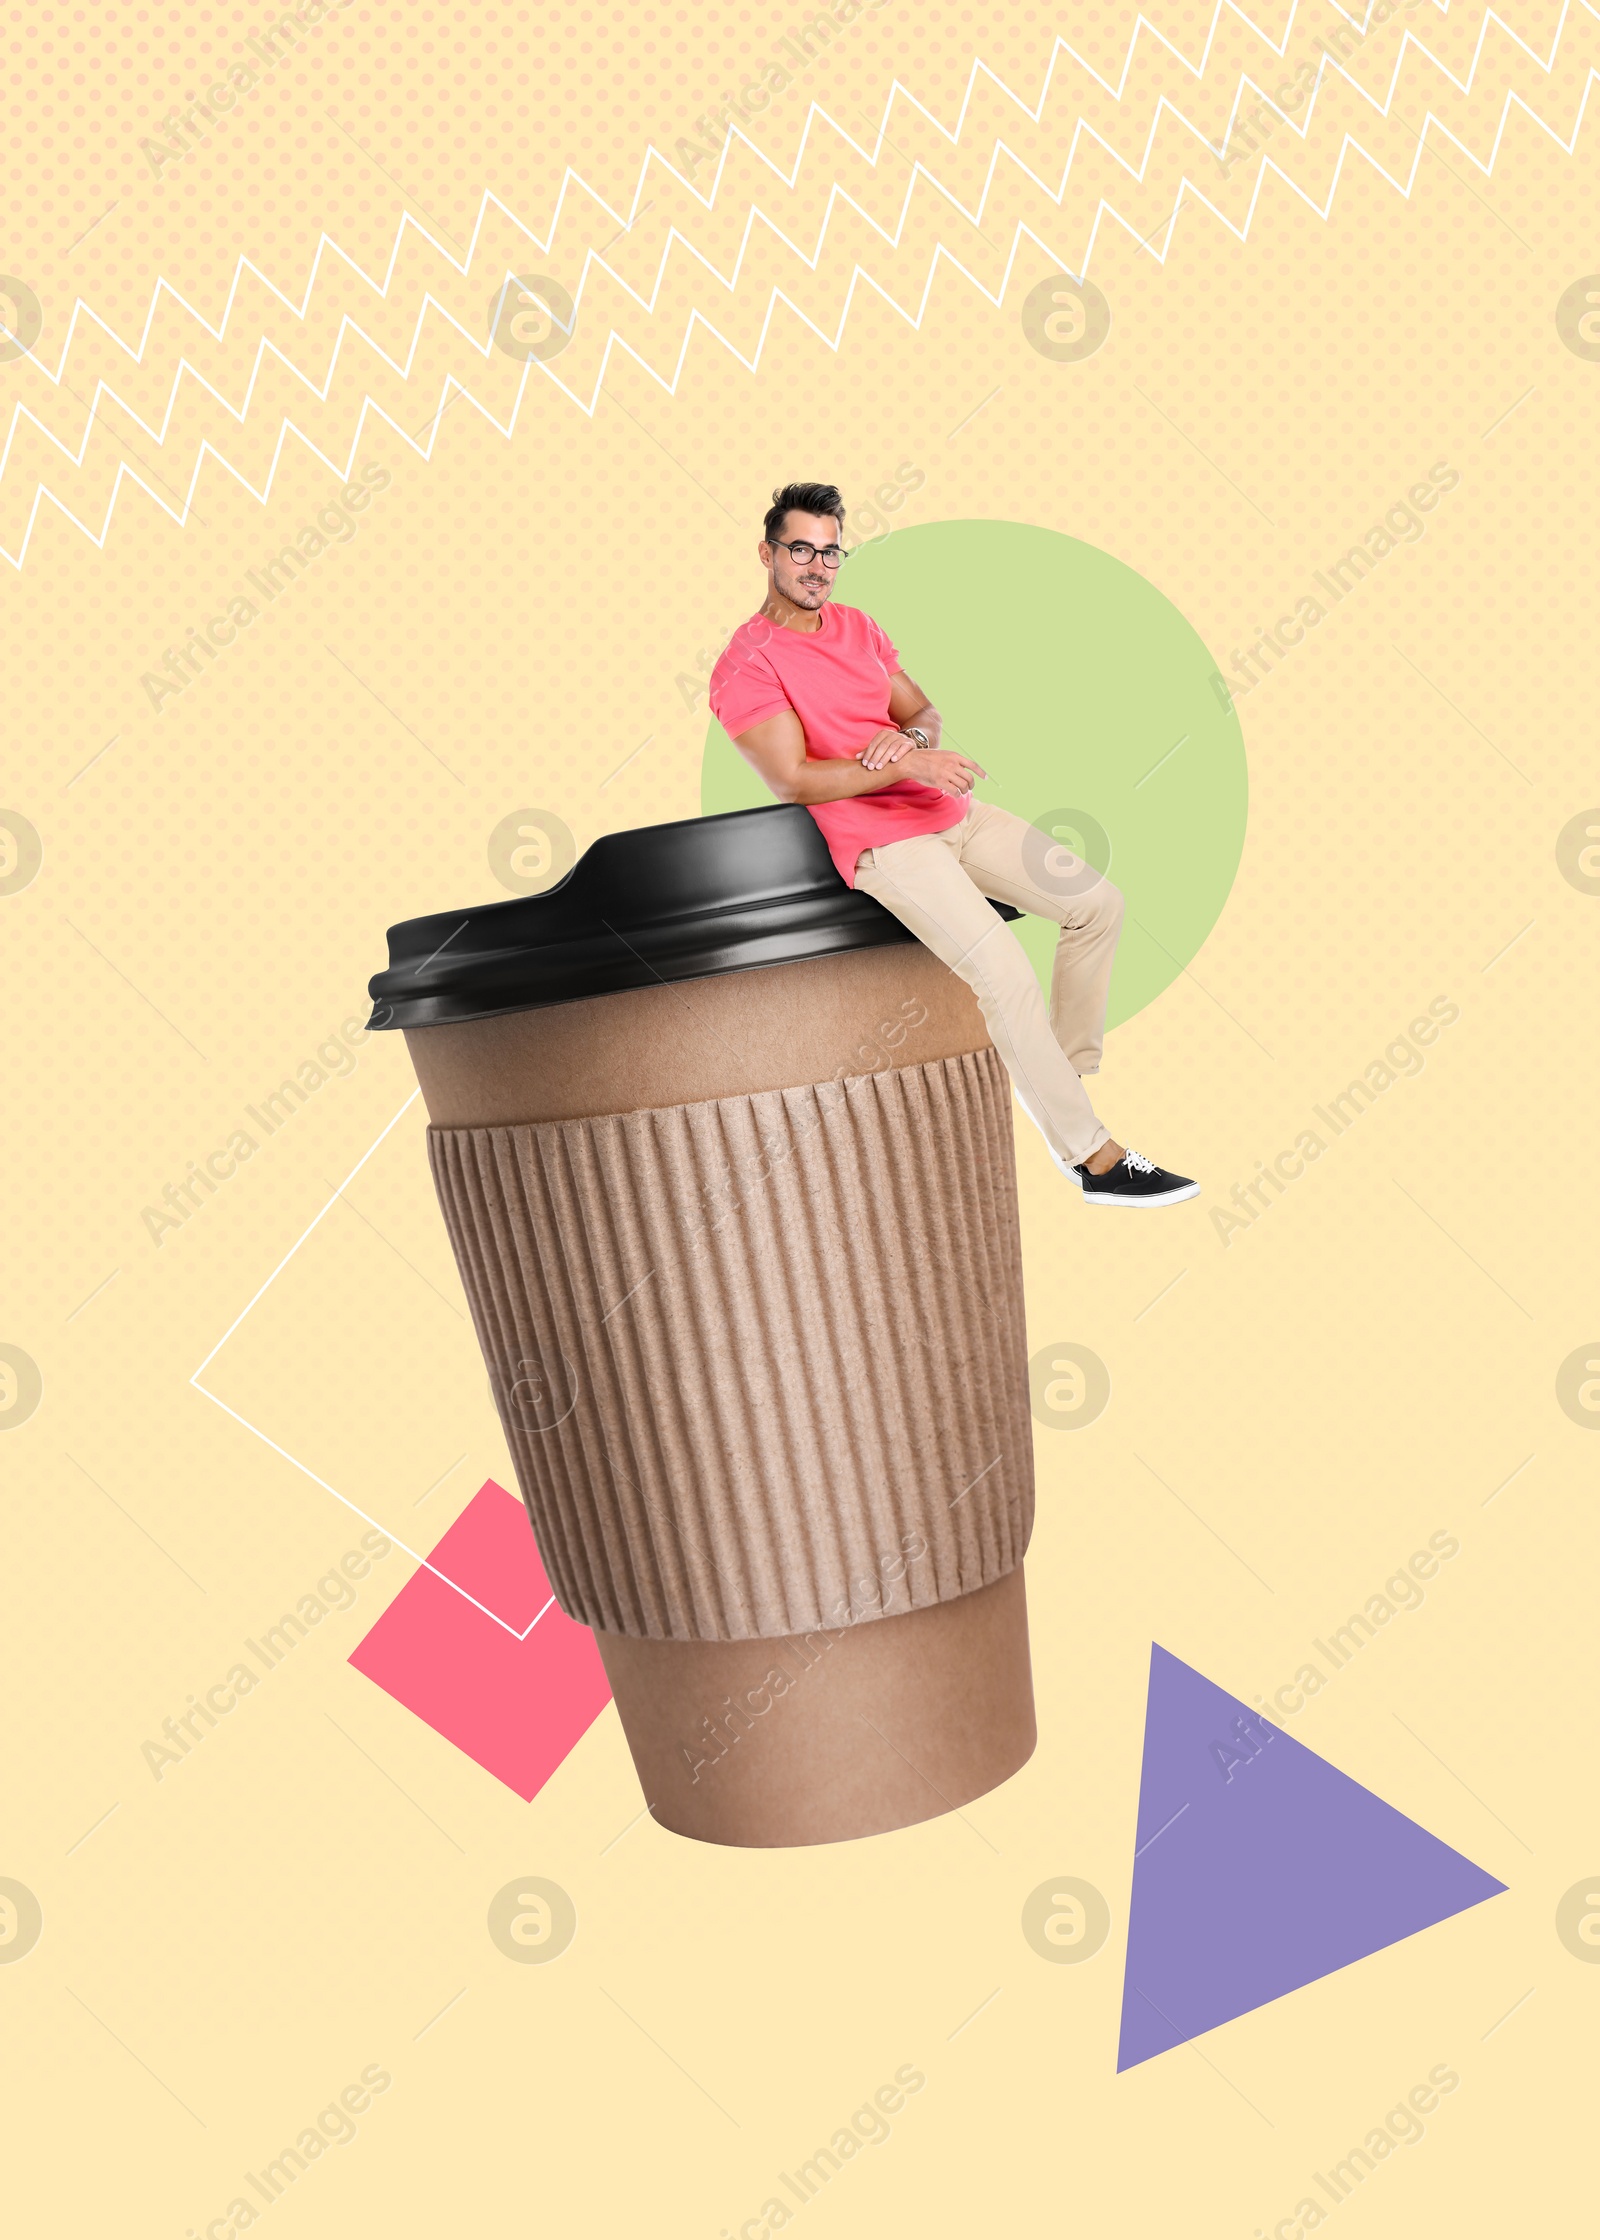 Image of Coffee to go. Man sitting on takeaway paper cup on beige background, stylish artwork